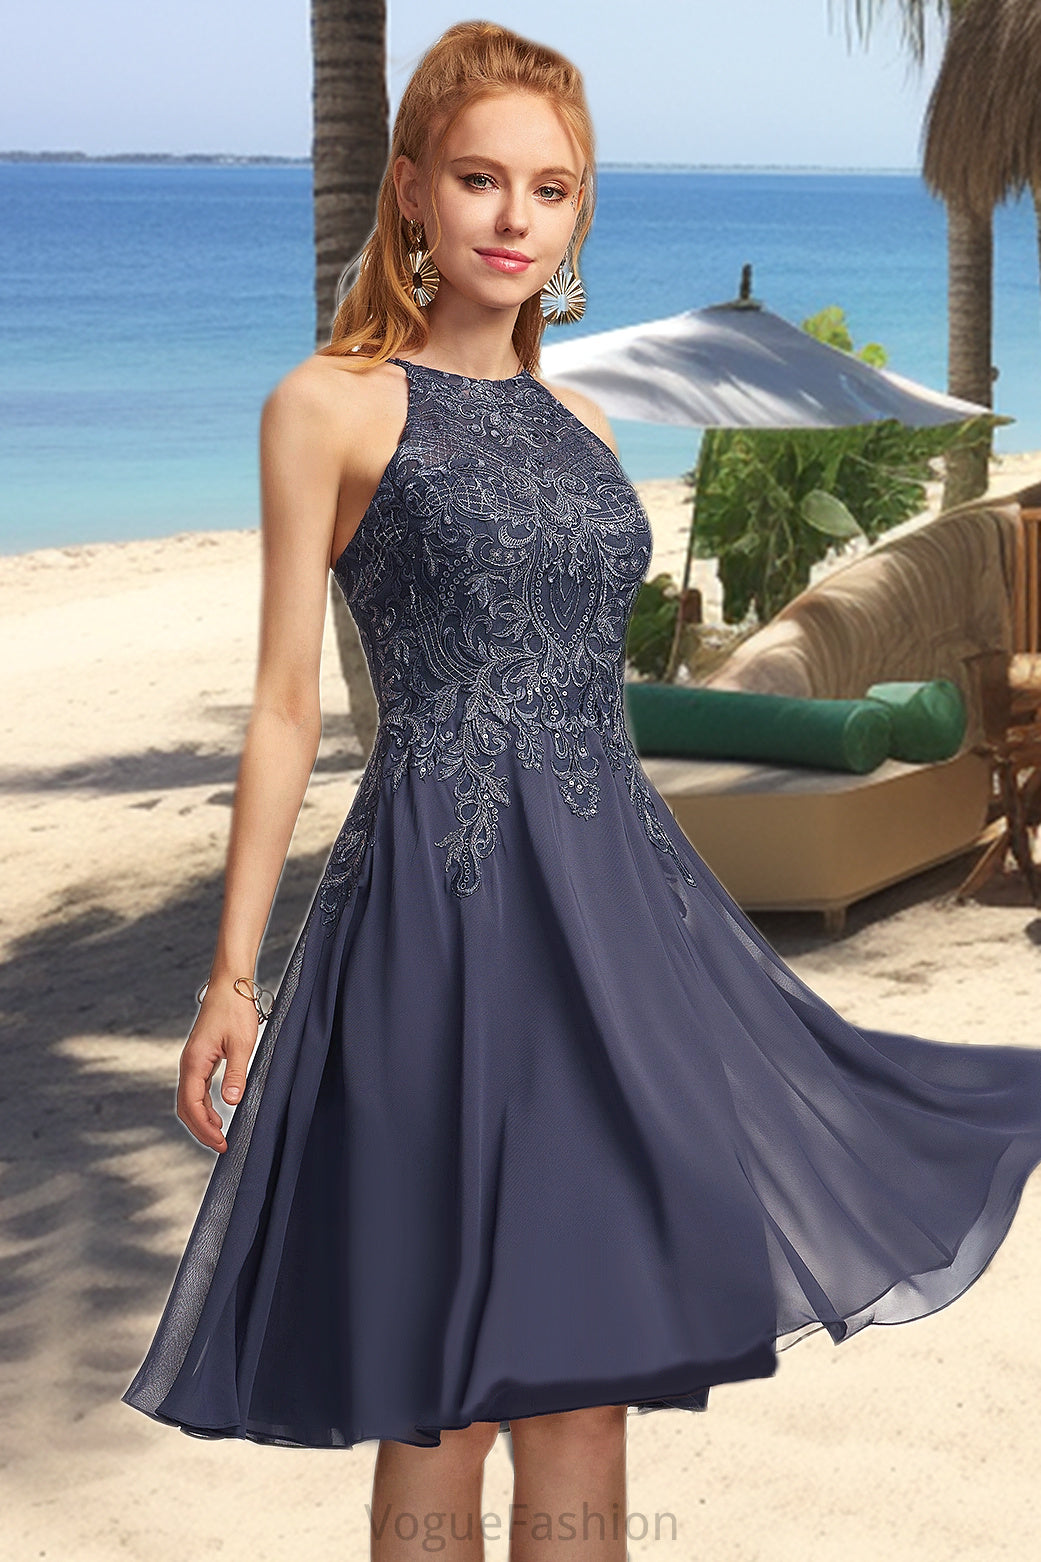 Maya A-line Scoop Knee-Length Chiffon Homecoming Dress With Appliques Lace DKP0020551